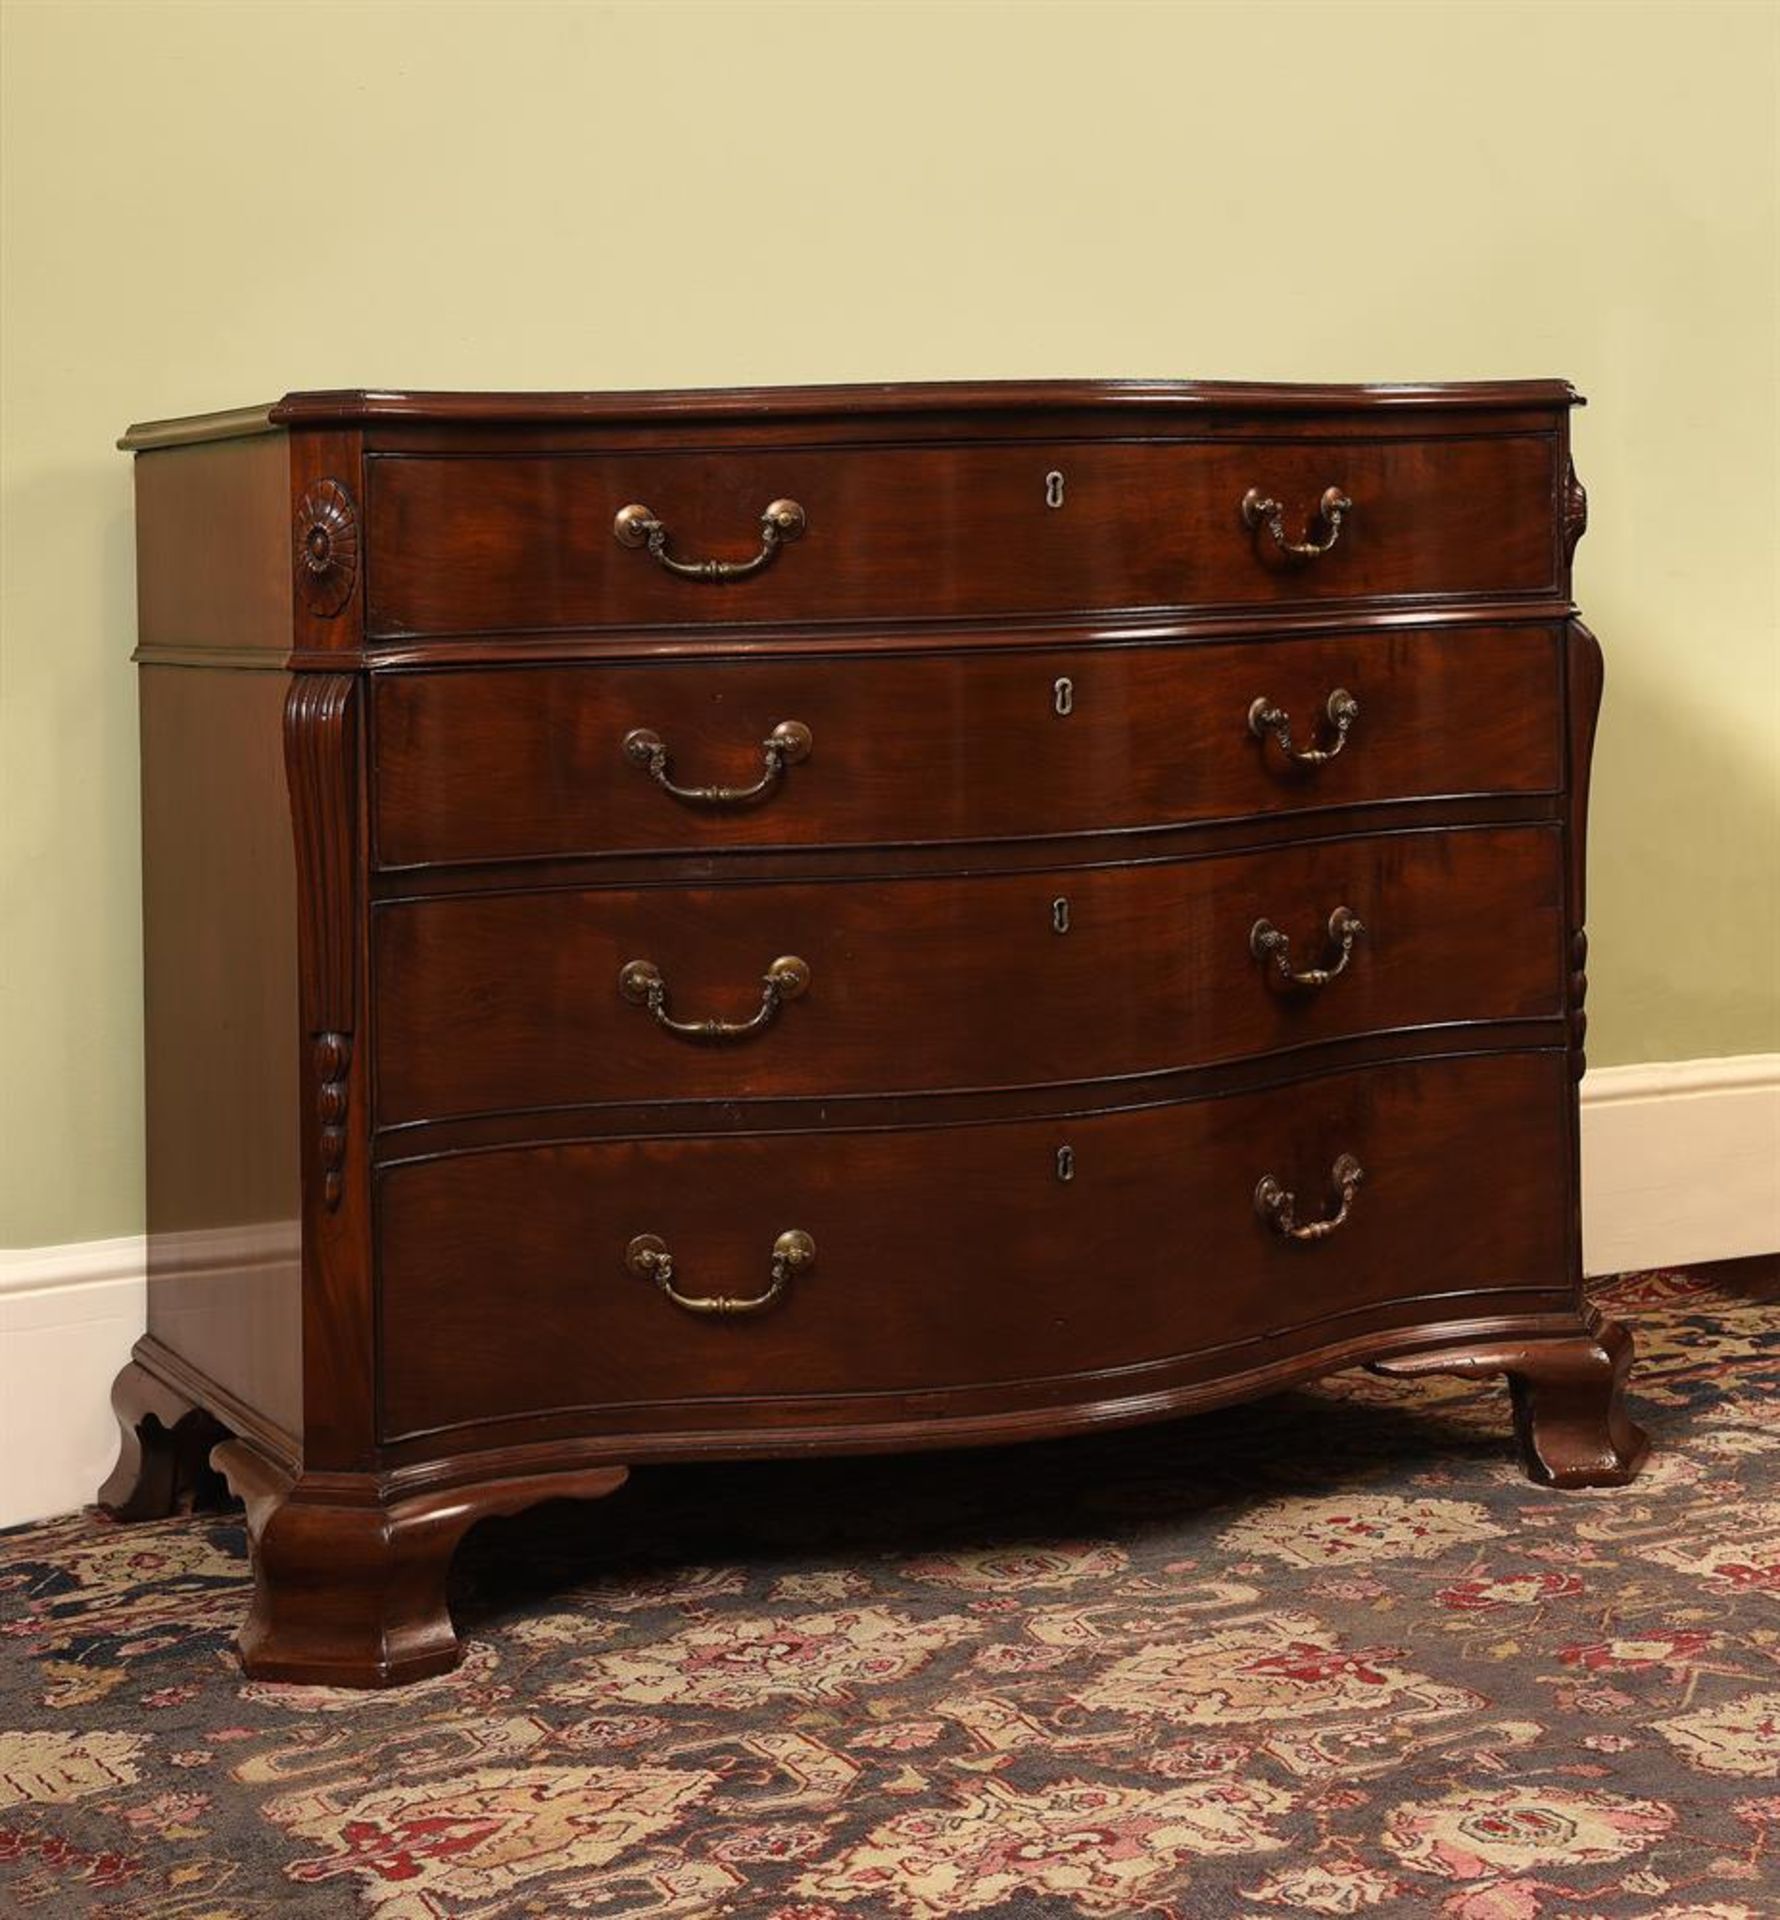 A GEORGE III MAHOGANY SERPENTINE COMMODE, IN THE MANNER OF THOMAS CHIPPENDALE, CIRCA 1770 - Image 2 of 9